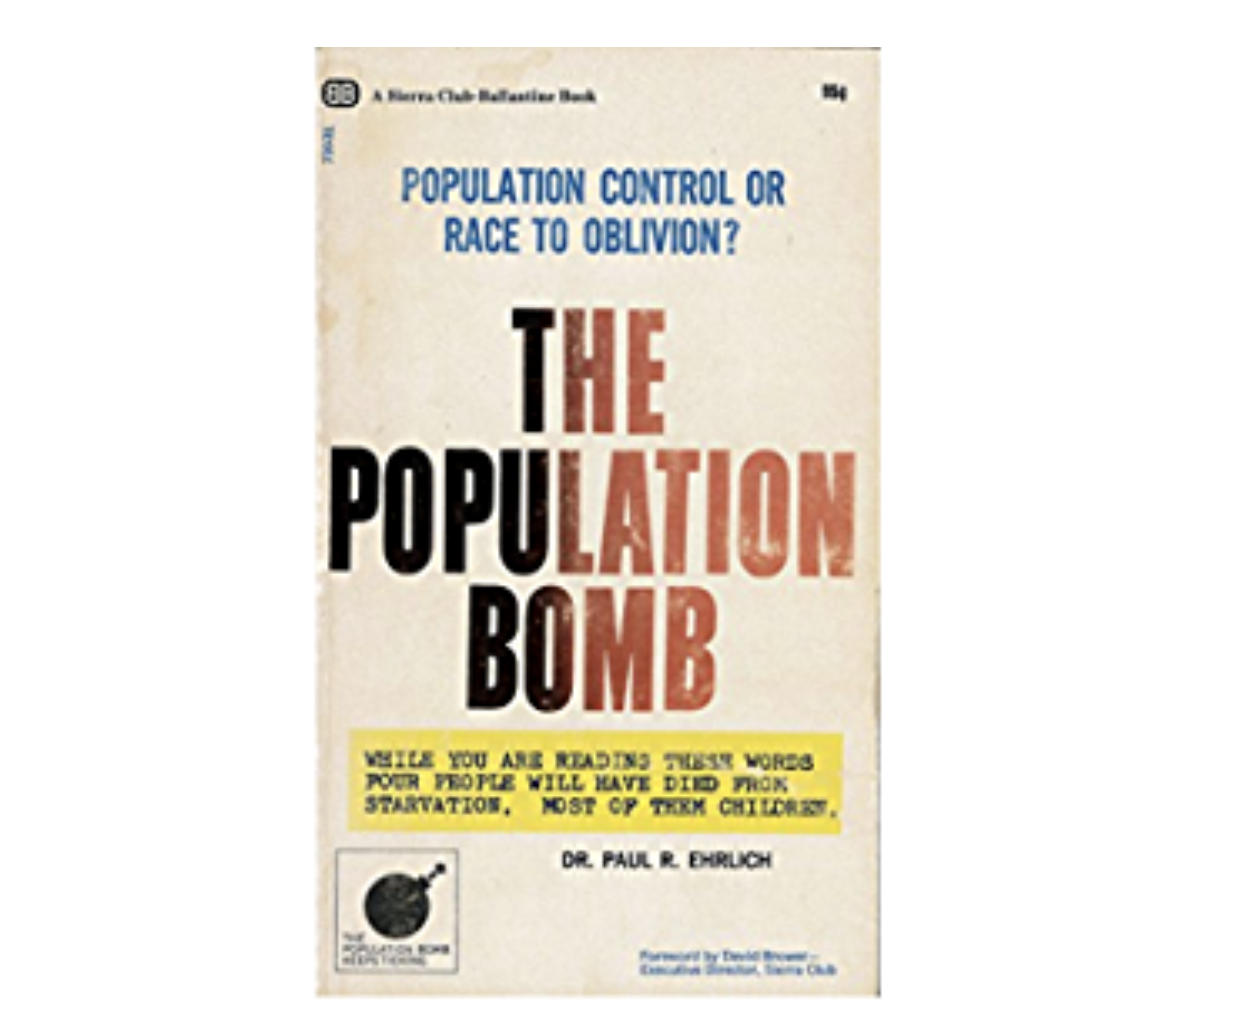 Paul Ehrlich's 1968 book, The Population Bomb